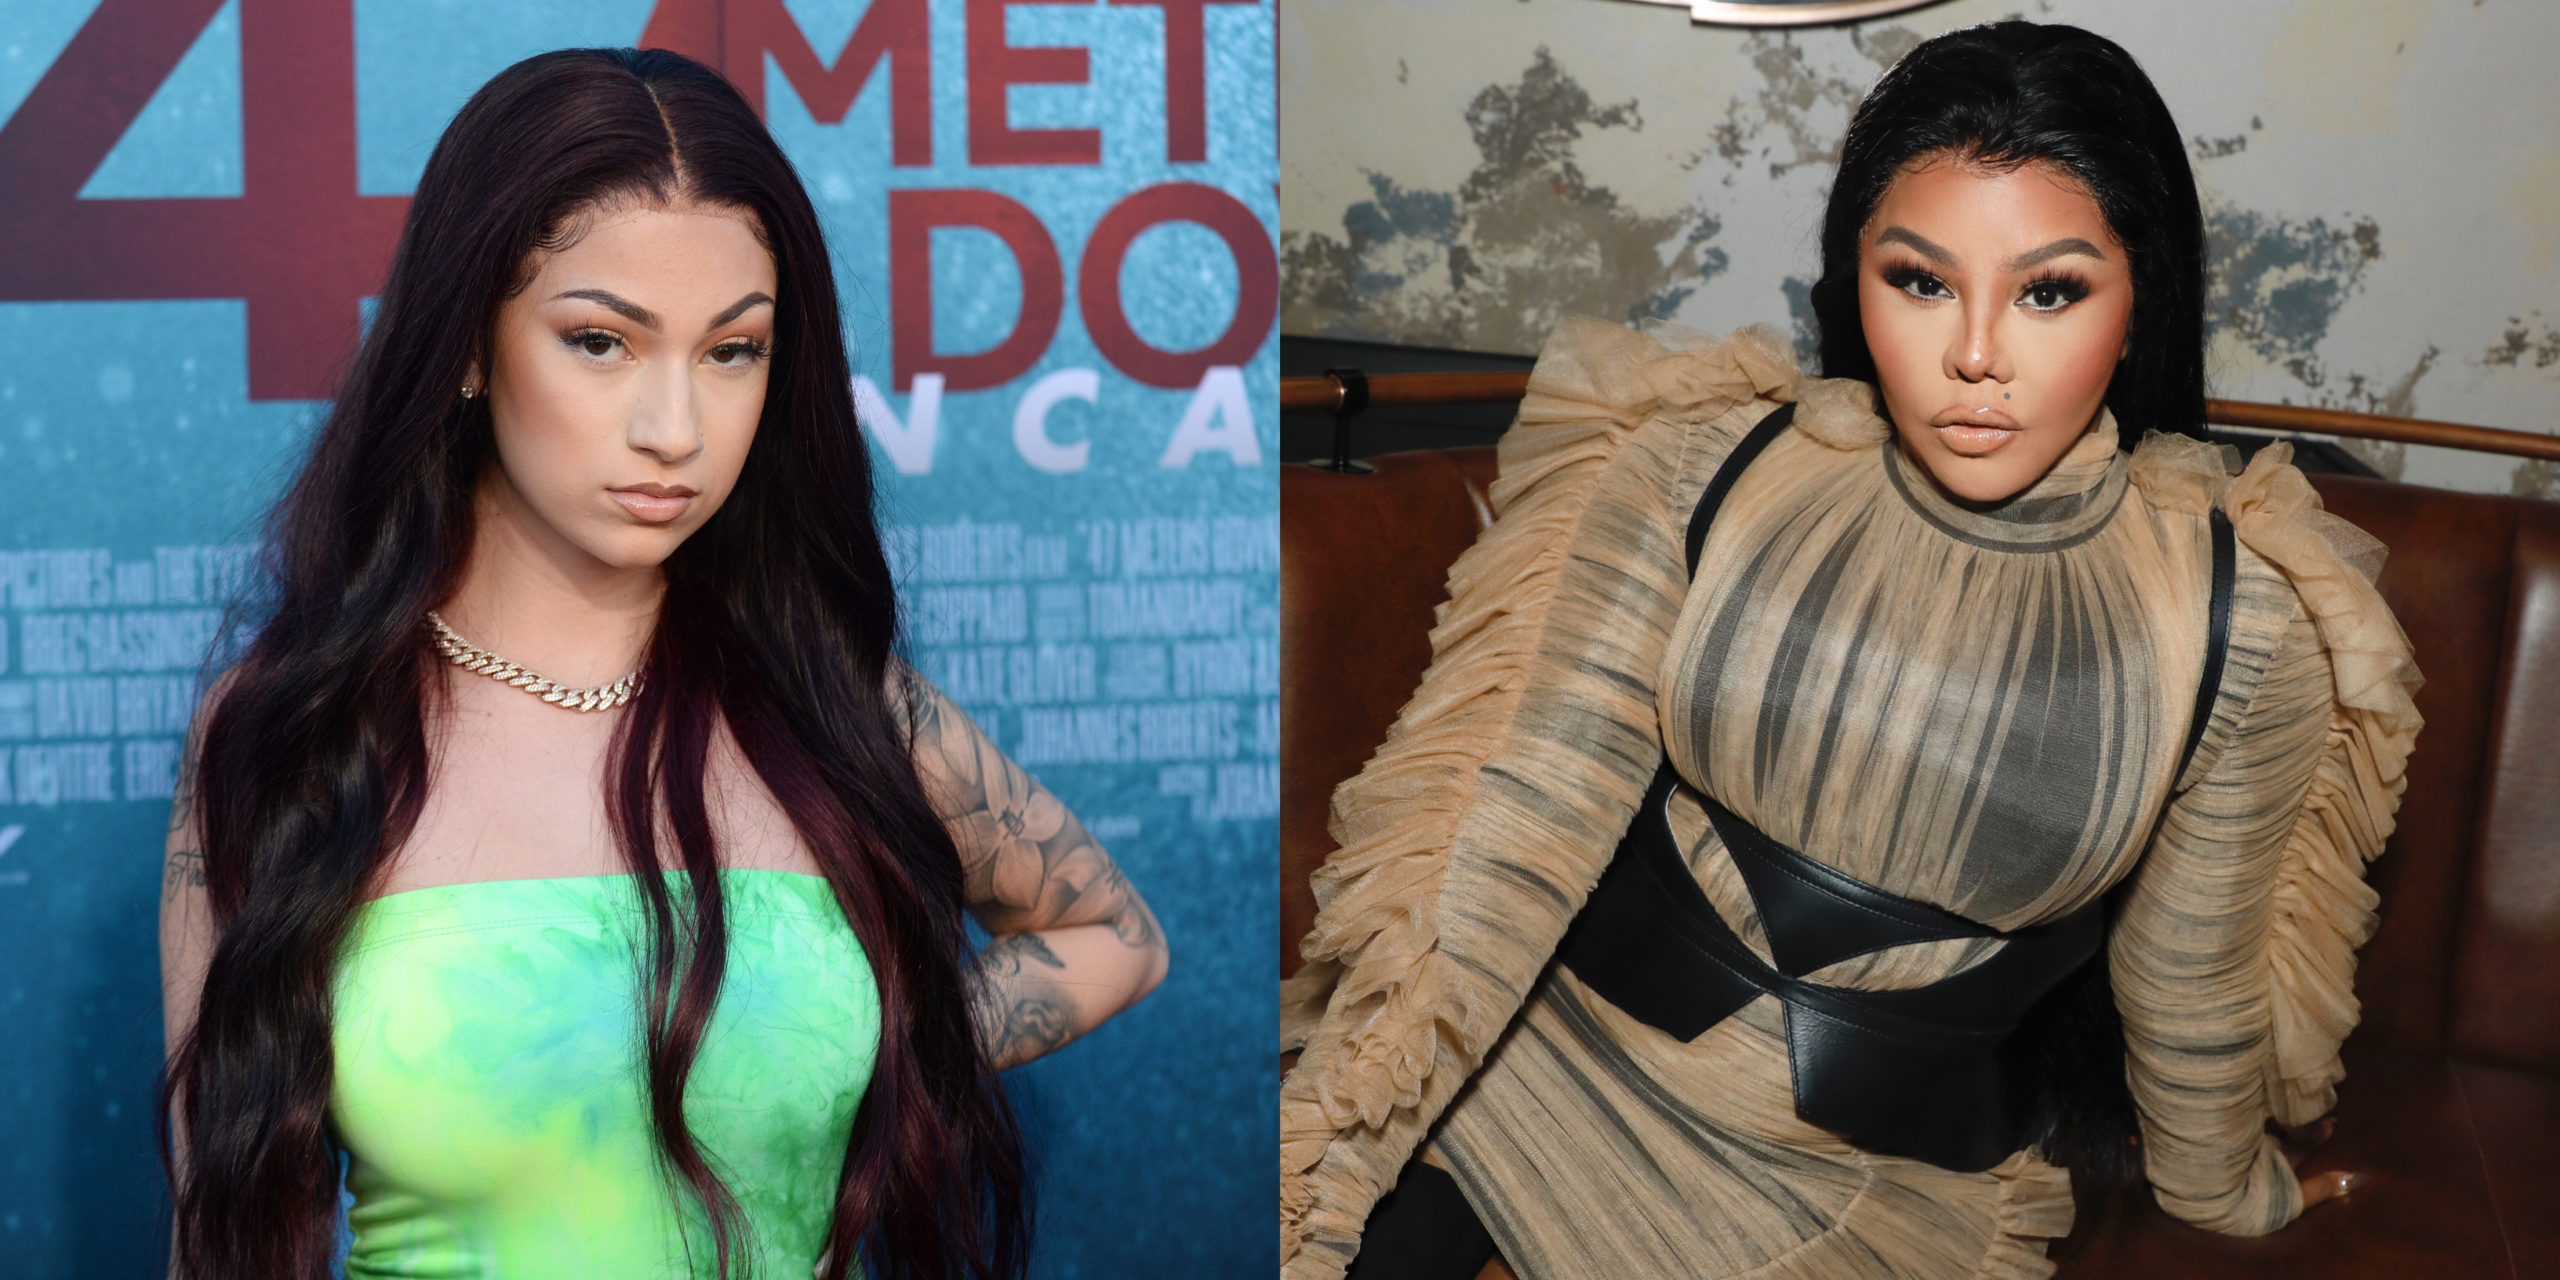 Bhad Bhabie Accuses Lil Kim of Trying to Appear 'White' in Response to Black Face Backlash